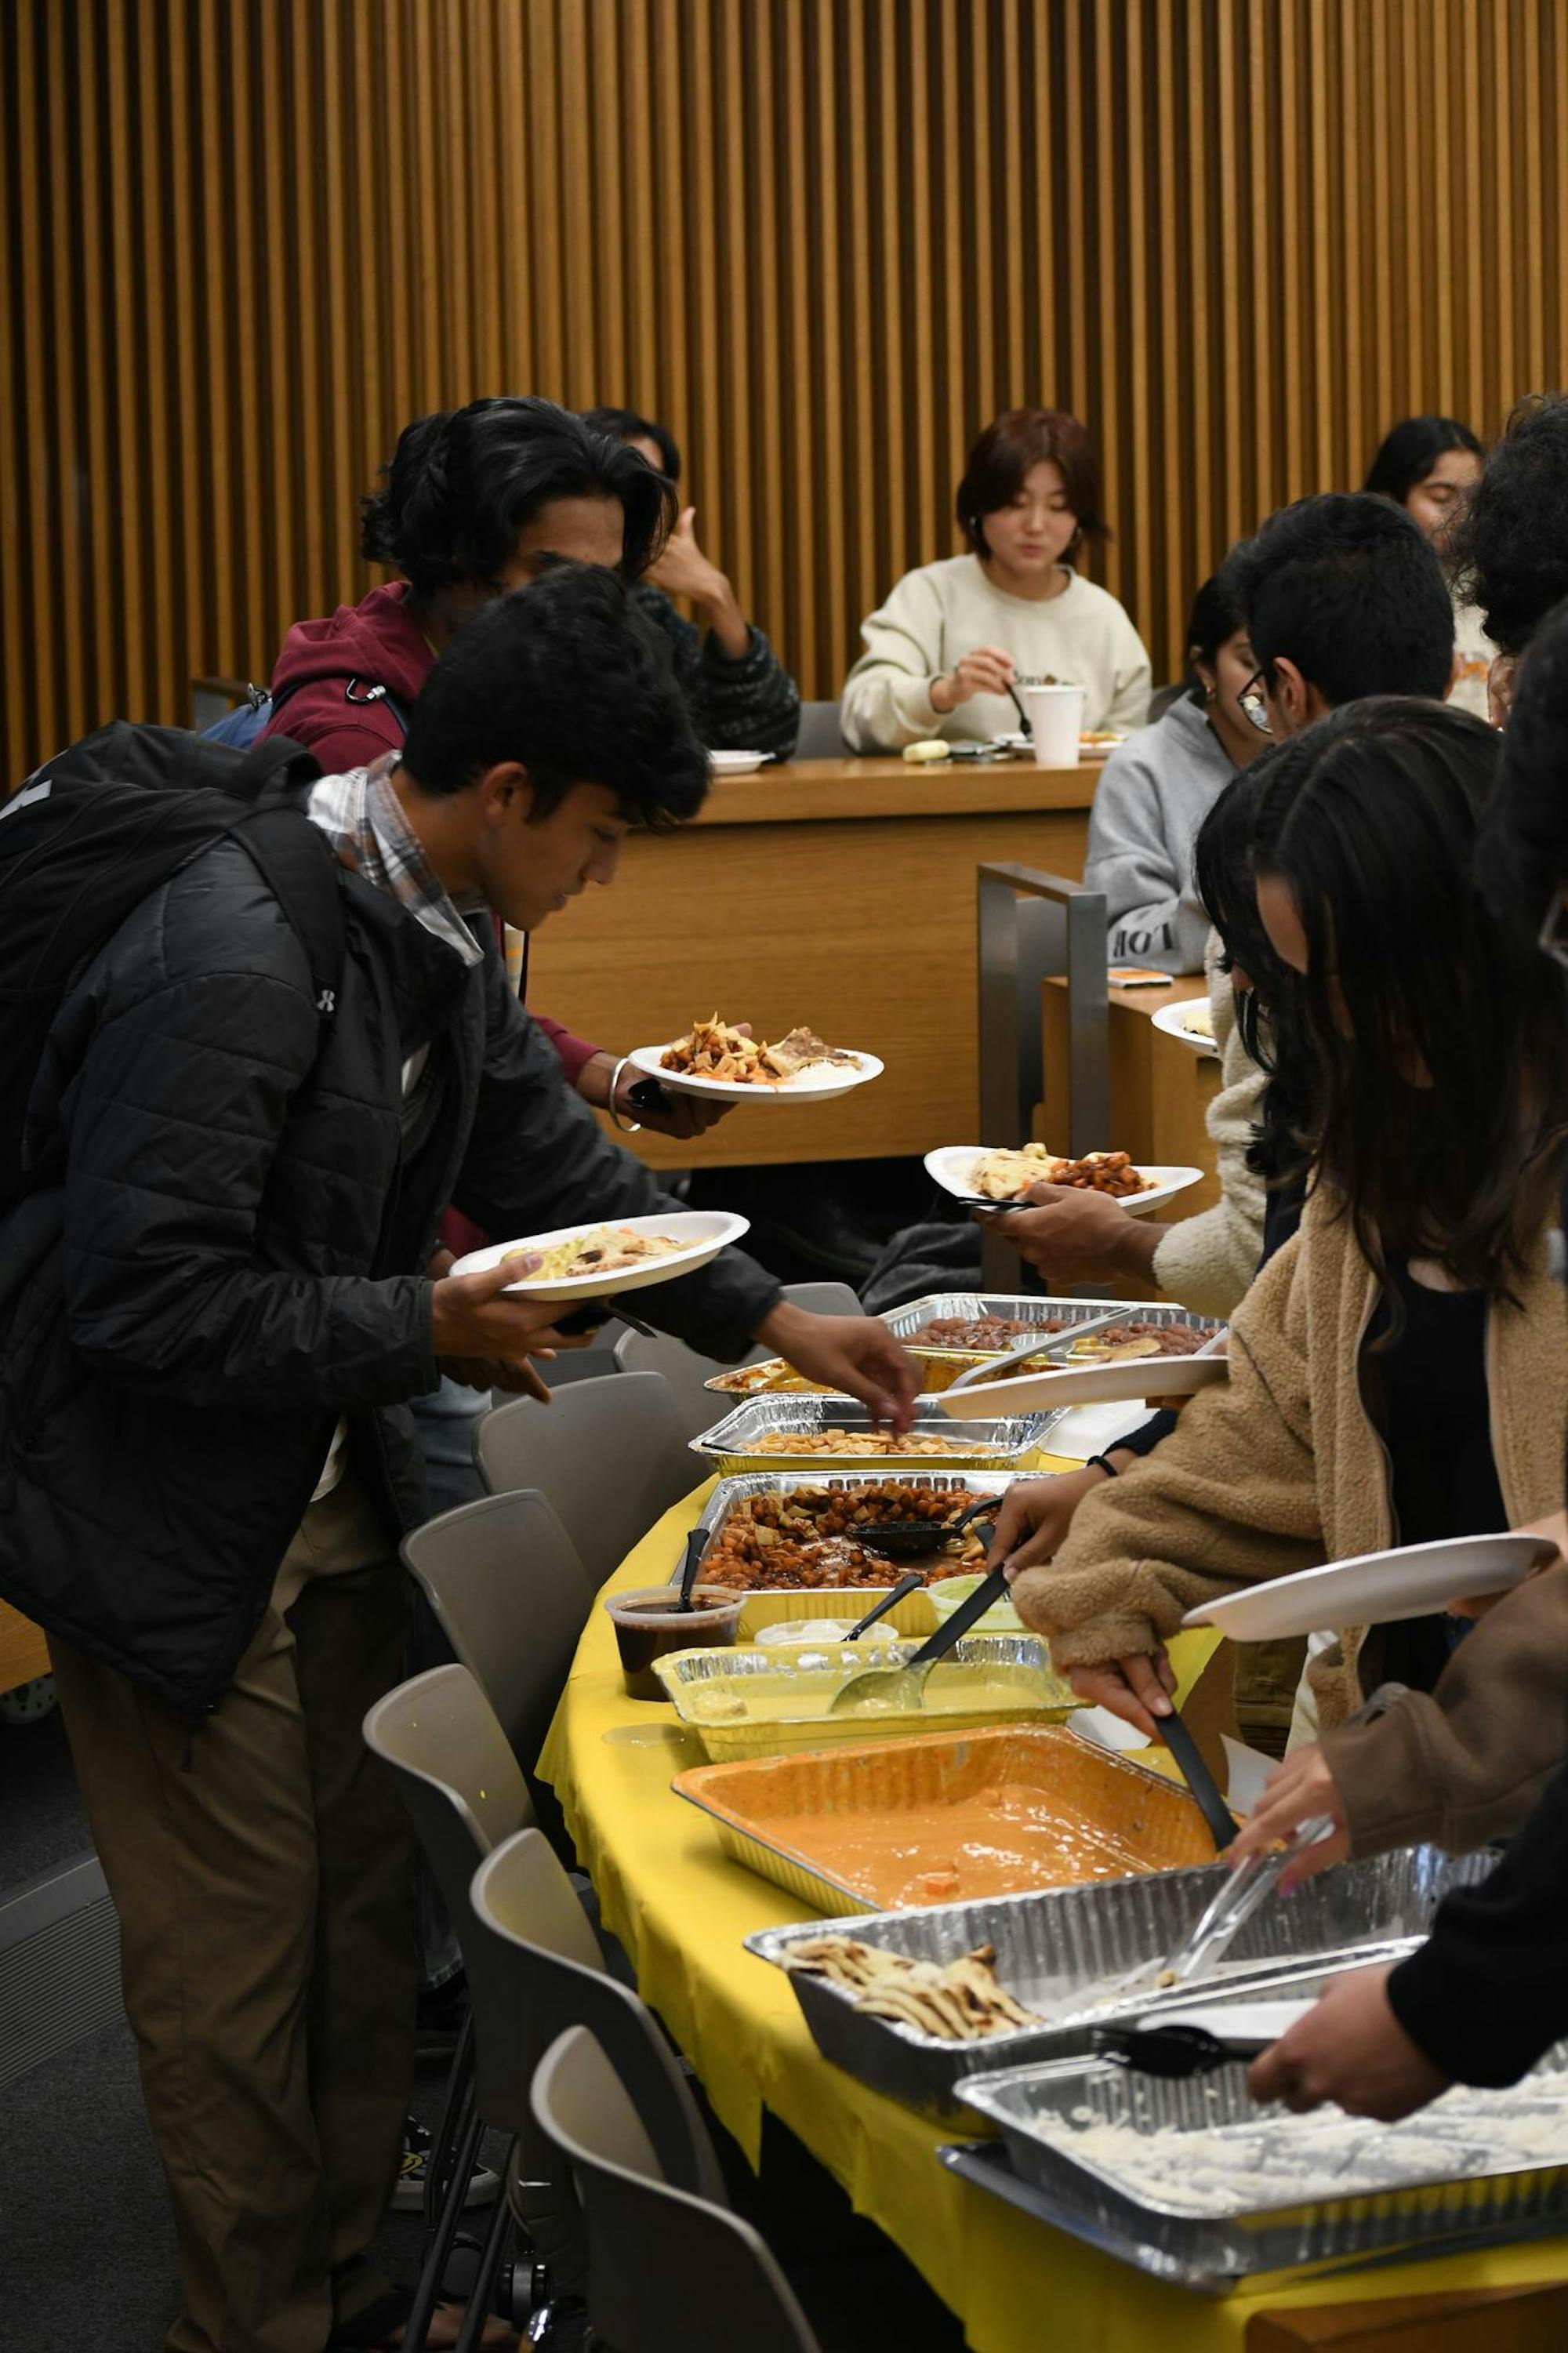 A number of students holding white plates of food gather around a table with silver food containers